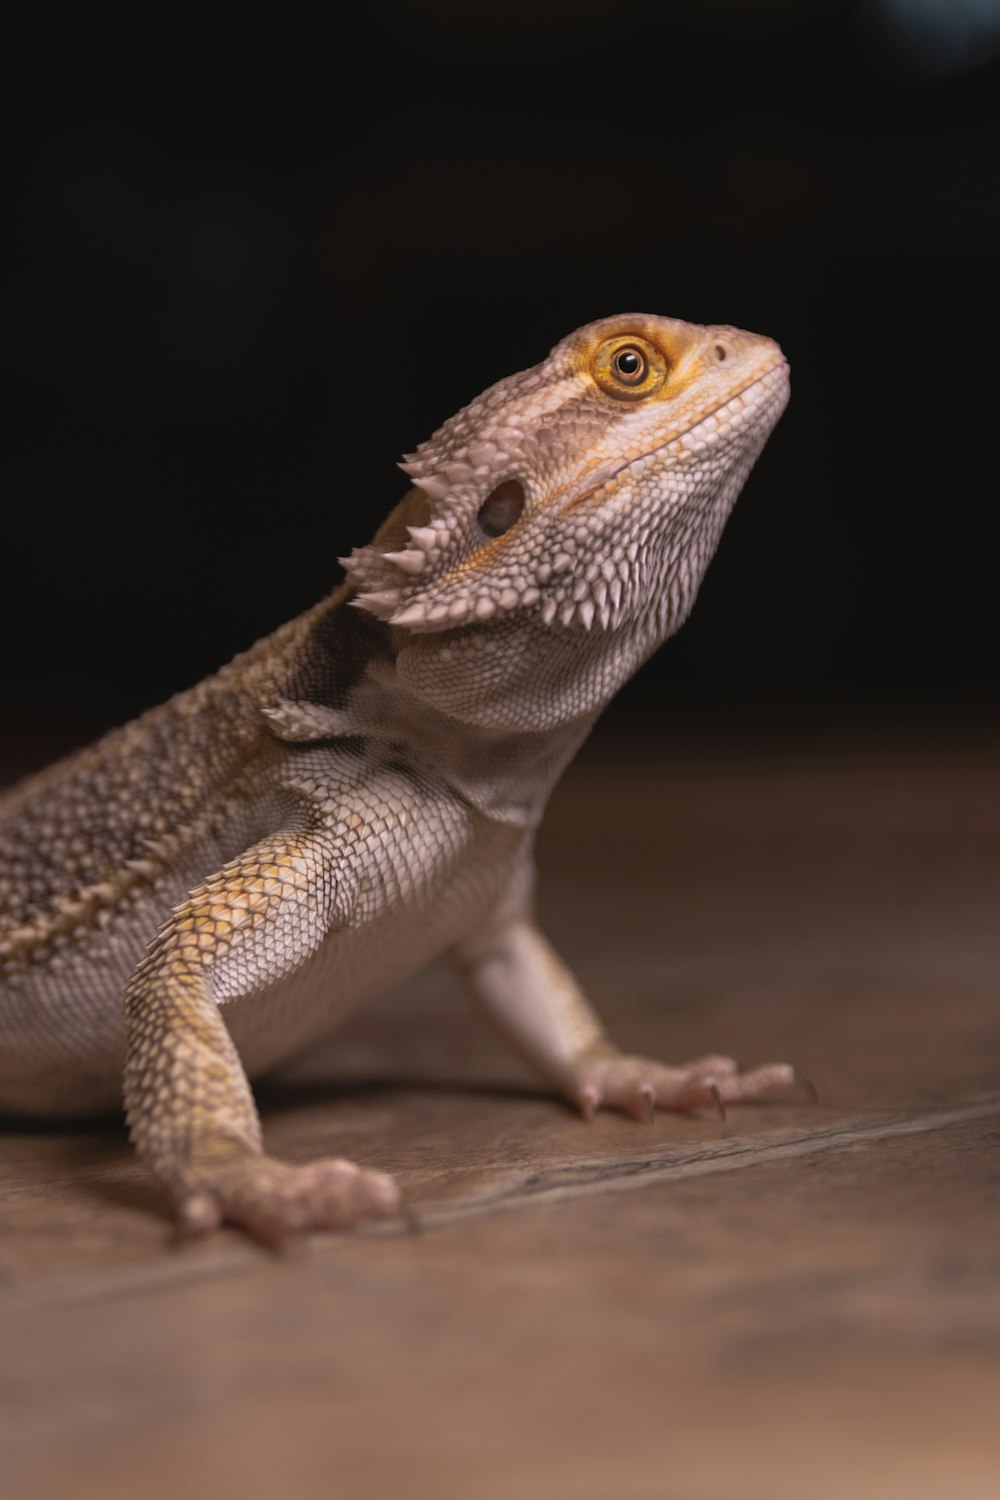 brown and white bearded dragon on brown wooden surface